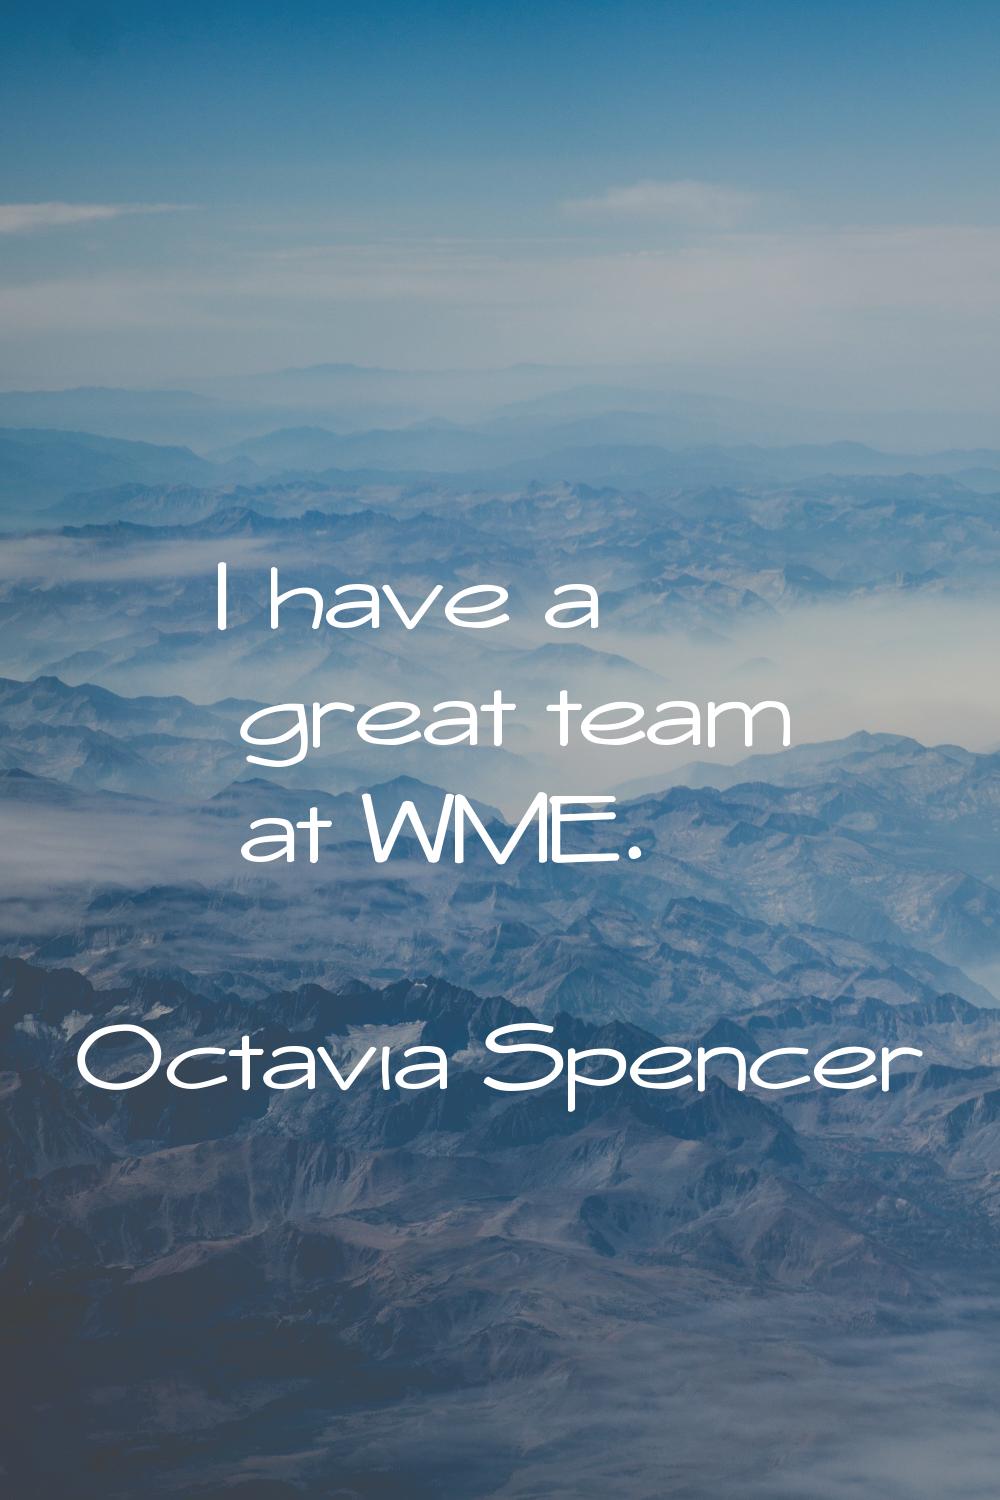 I have a great team at WME.